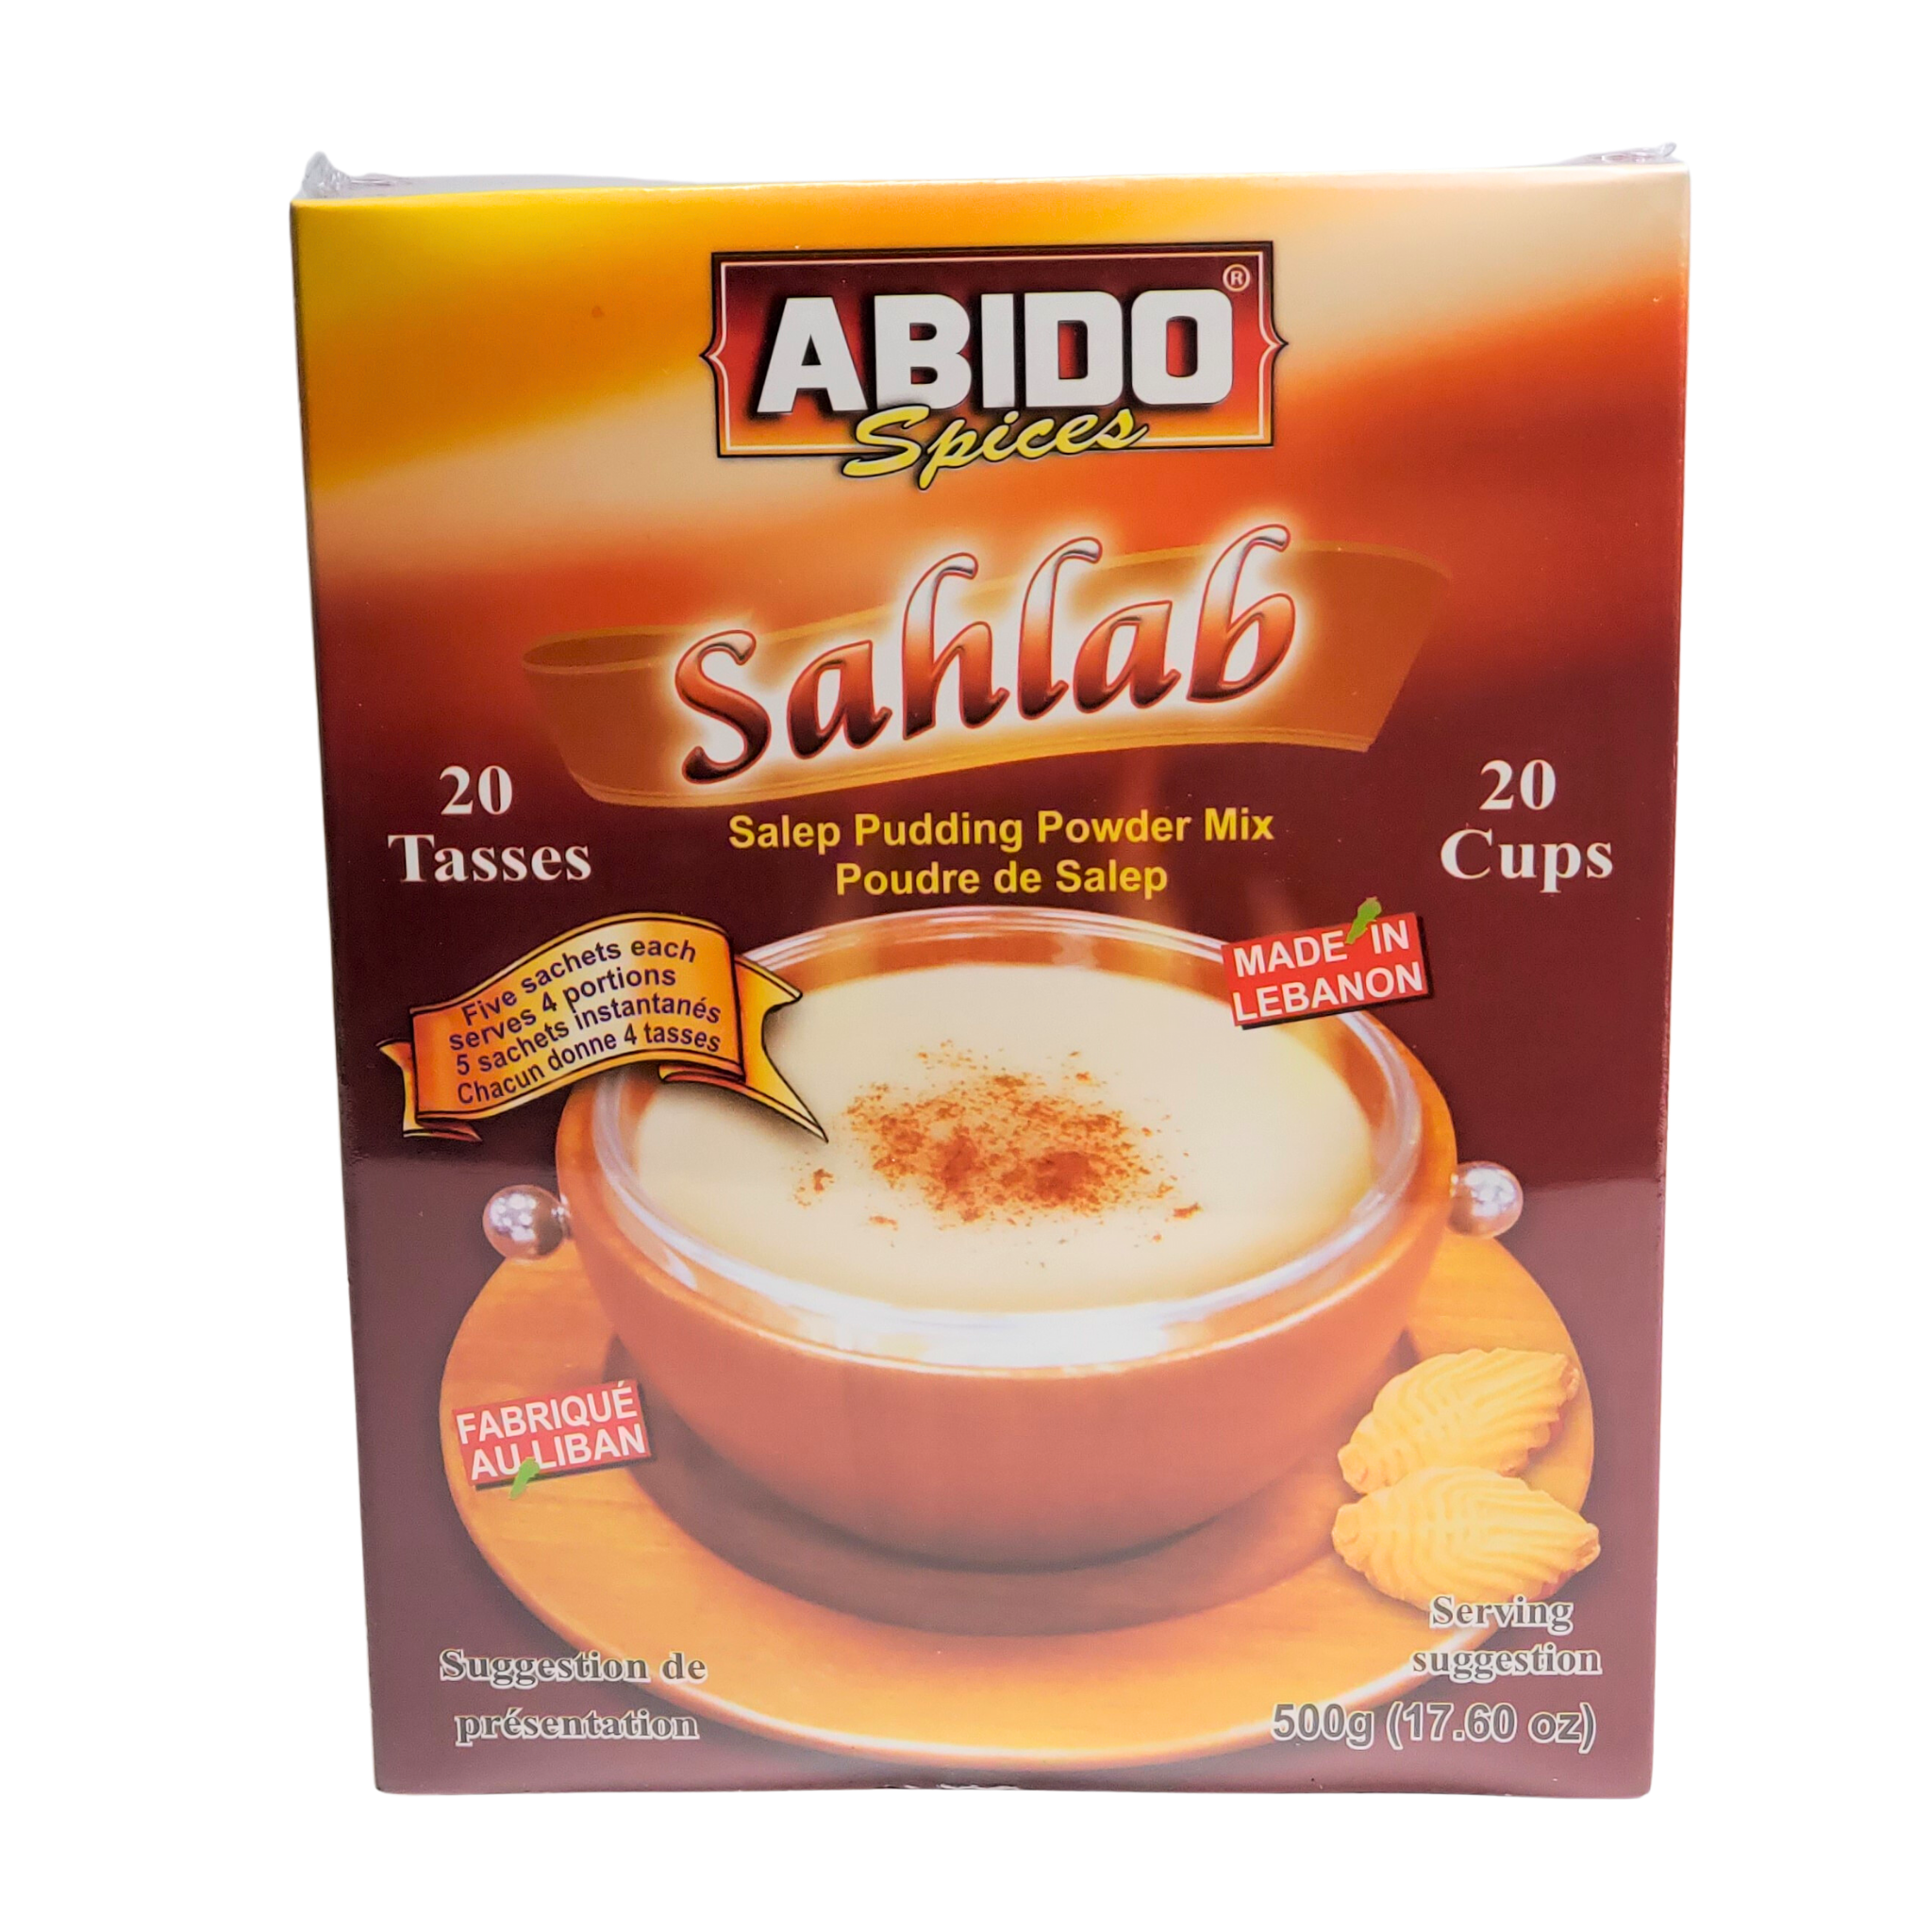 Abido Spices Sahlab Pudding Powder Mix 20 cups 500g